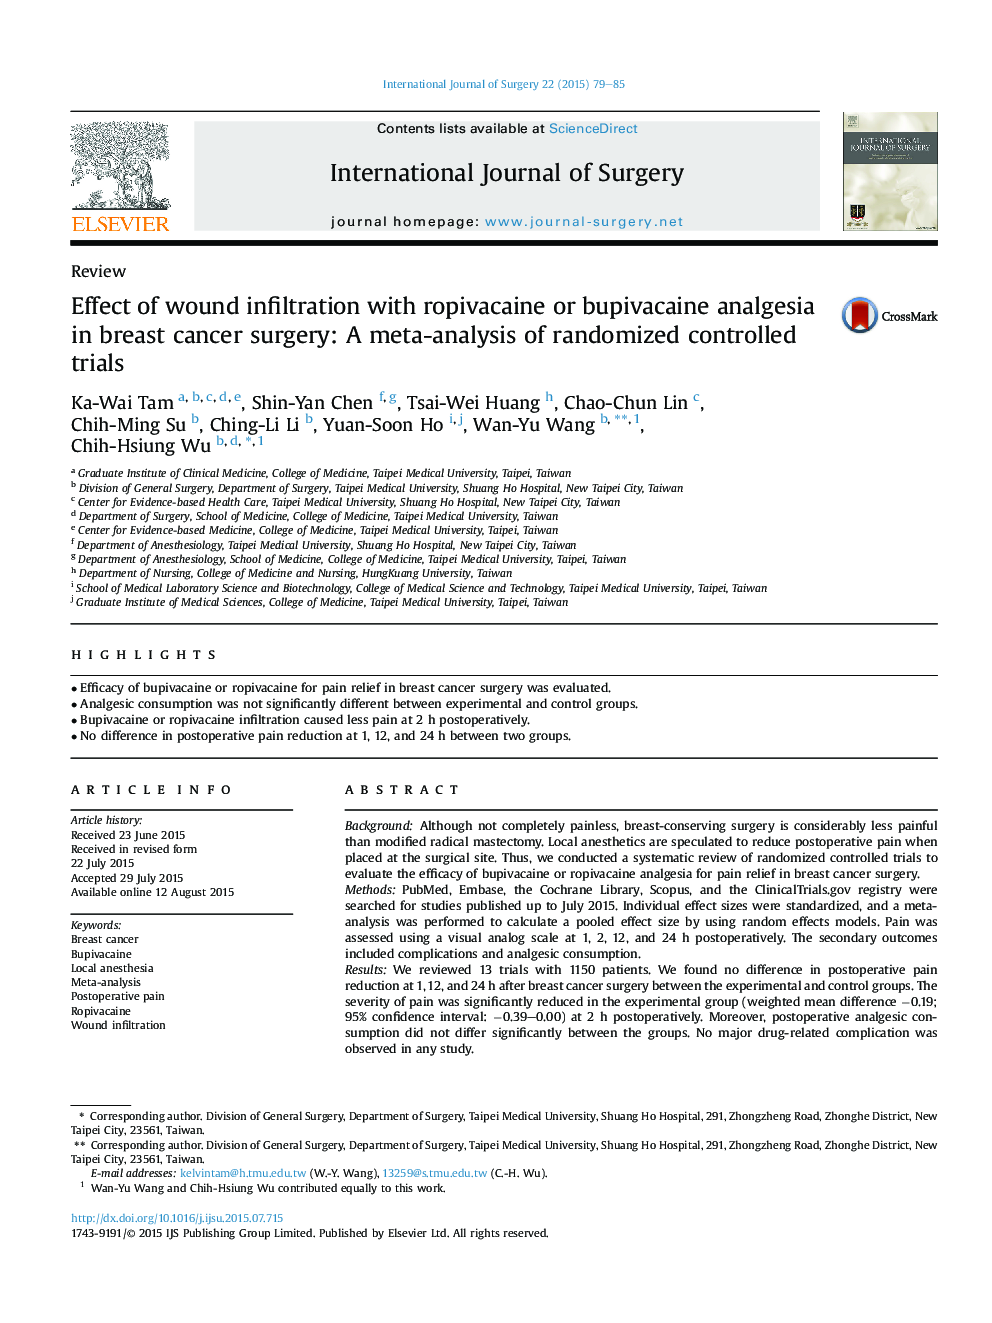 ReviewEffect of wound infiltration with ropivacaine or bupivacaine analgesia in breast cancer surgery: A meta-analysis of randomized controlled trials